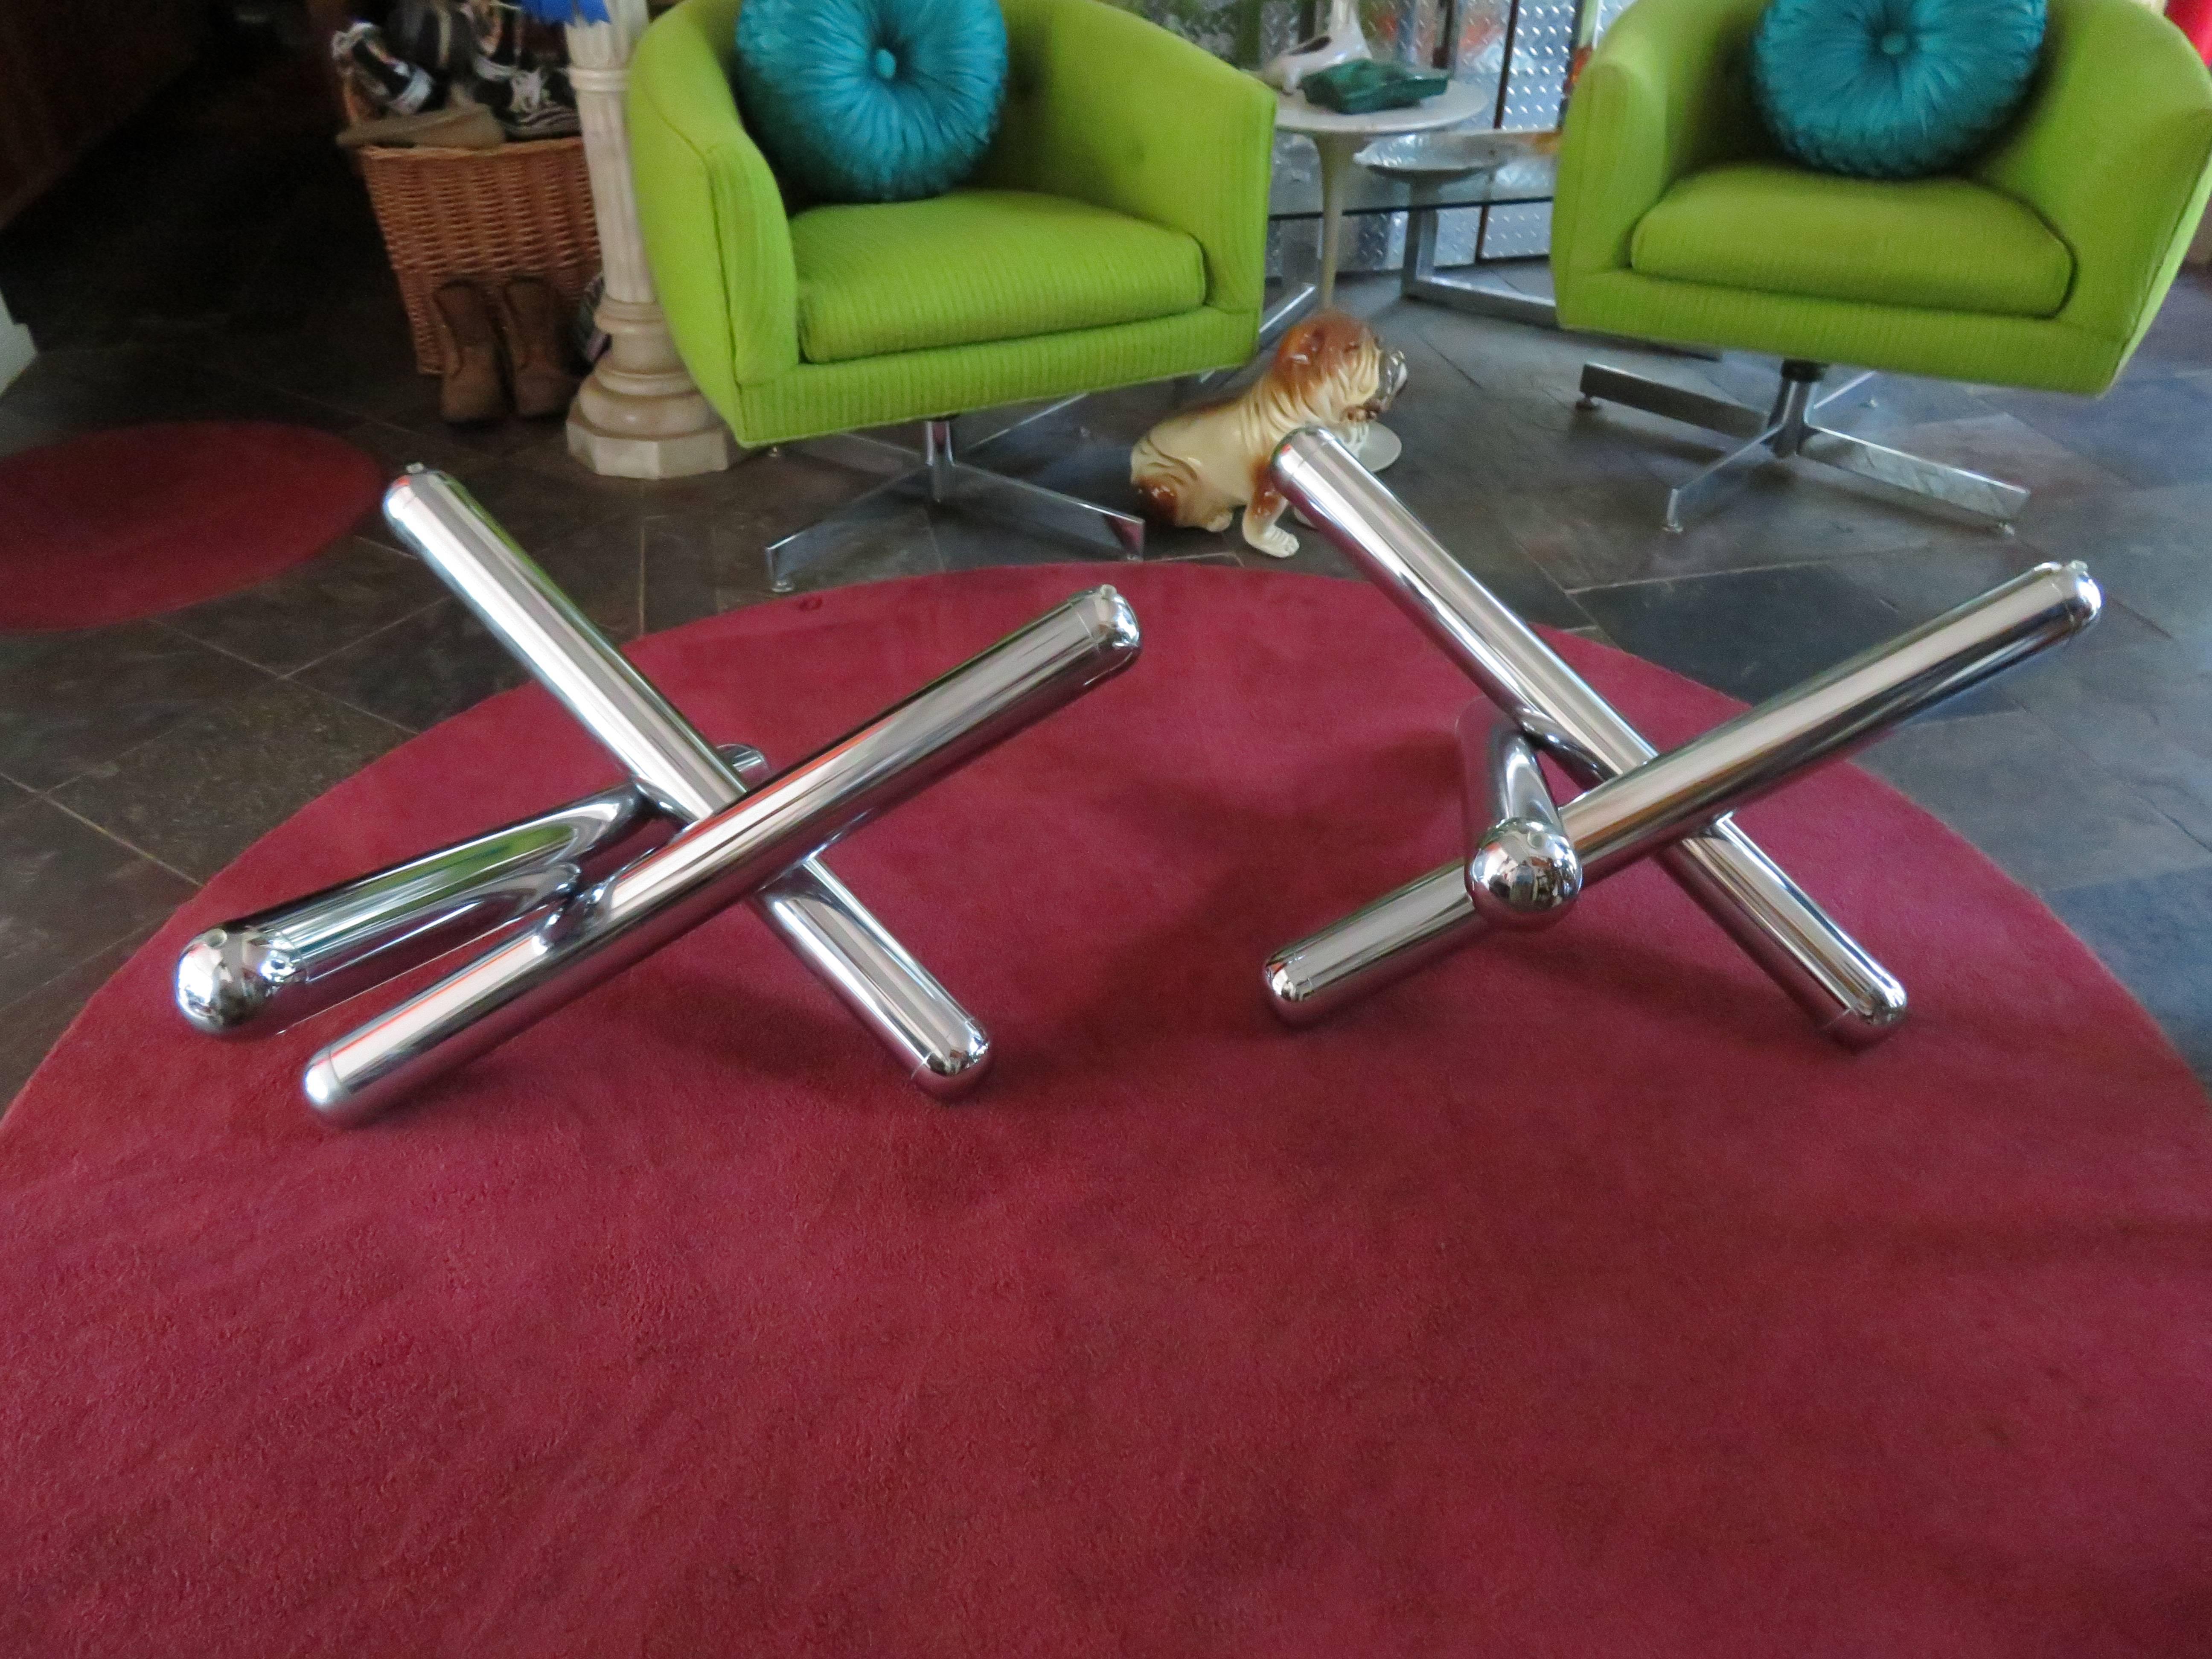 Stunning pair of chrome jax coffee tables. Use with one large glass or as two separate tables side by side you decide how to use these fantastic pop art tables. Each table base is 15" T x 29" W x 29" D.